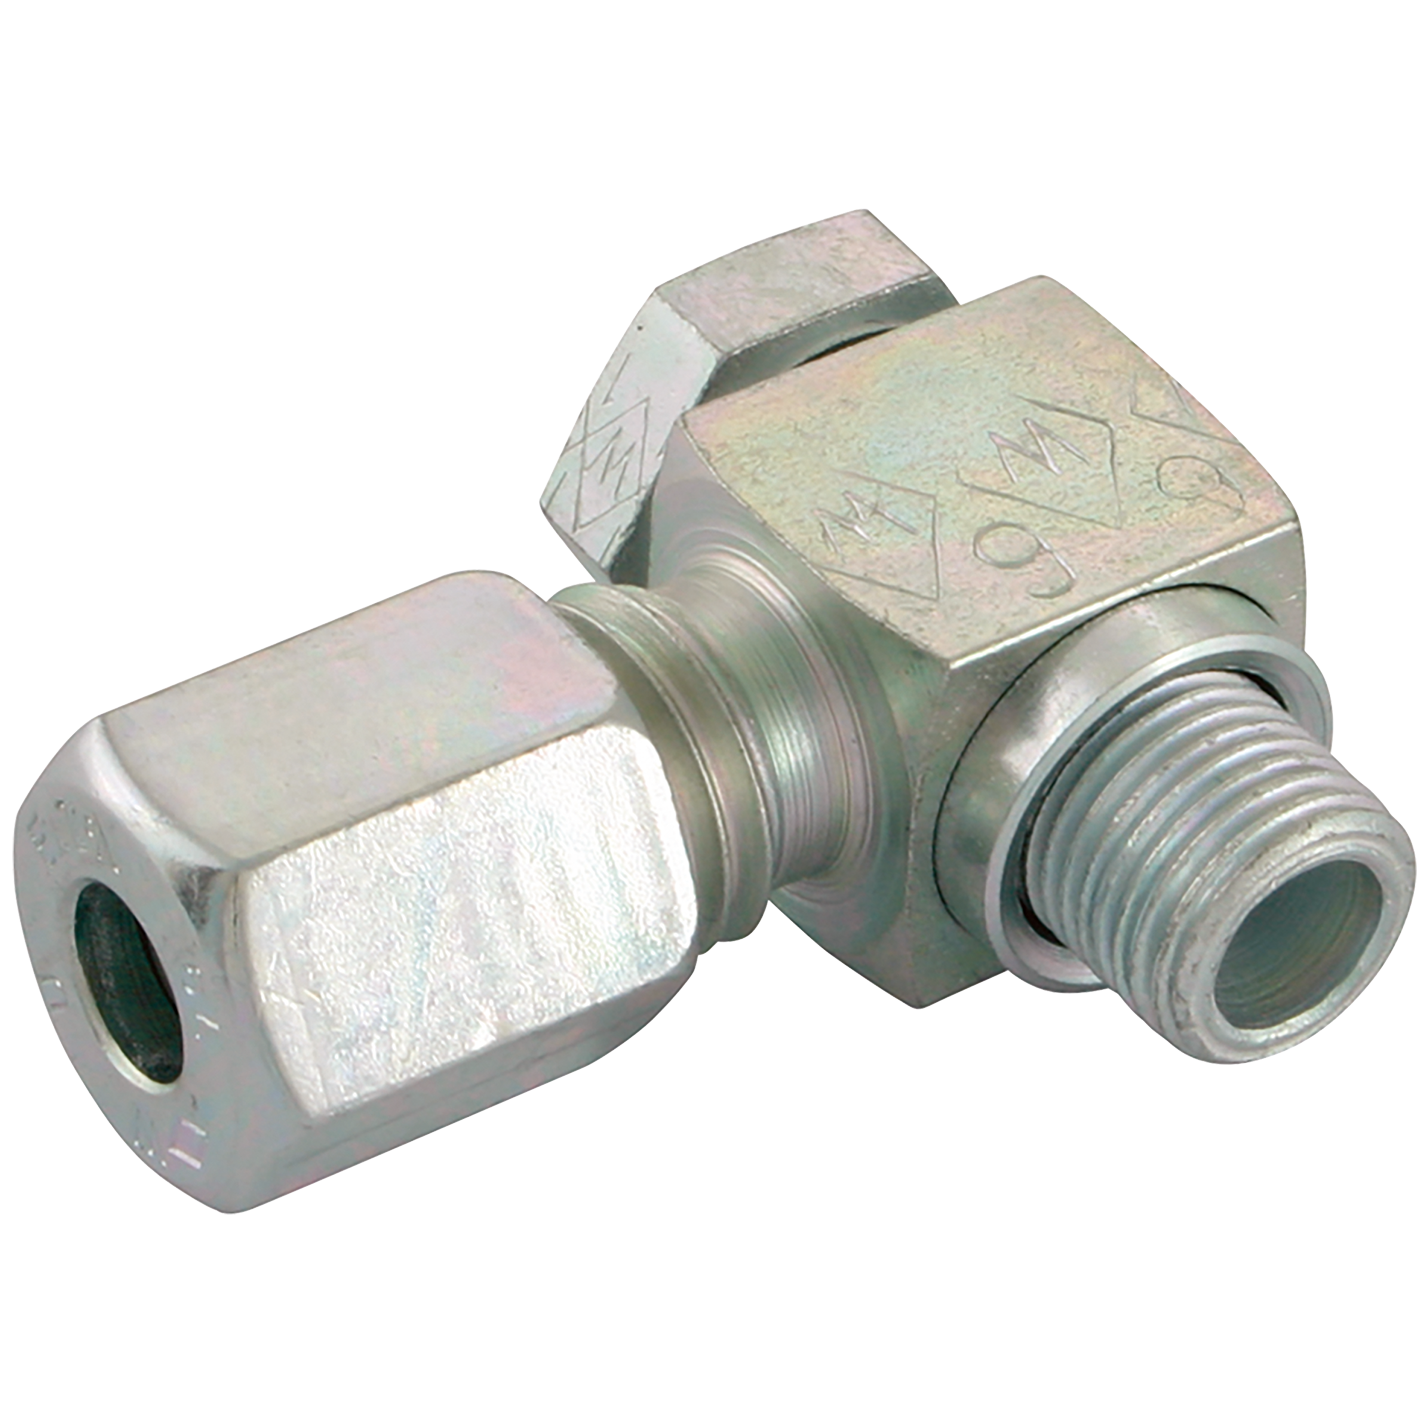 Suppliers of Hydraulic Connectors UK